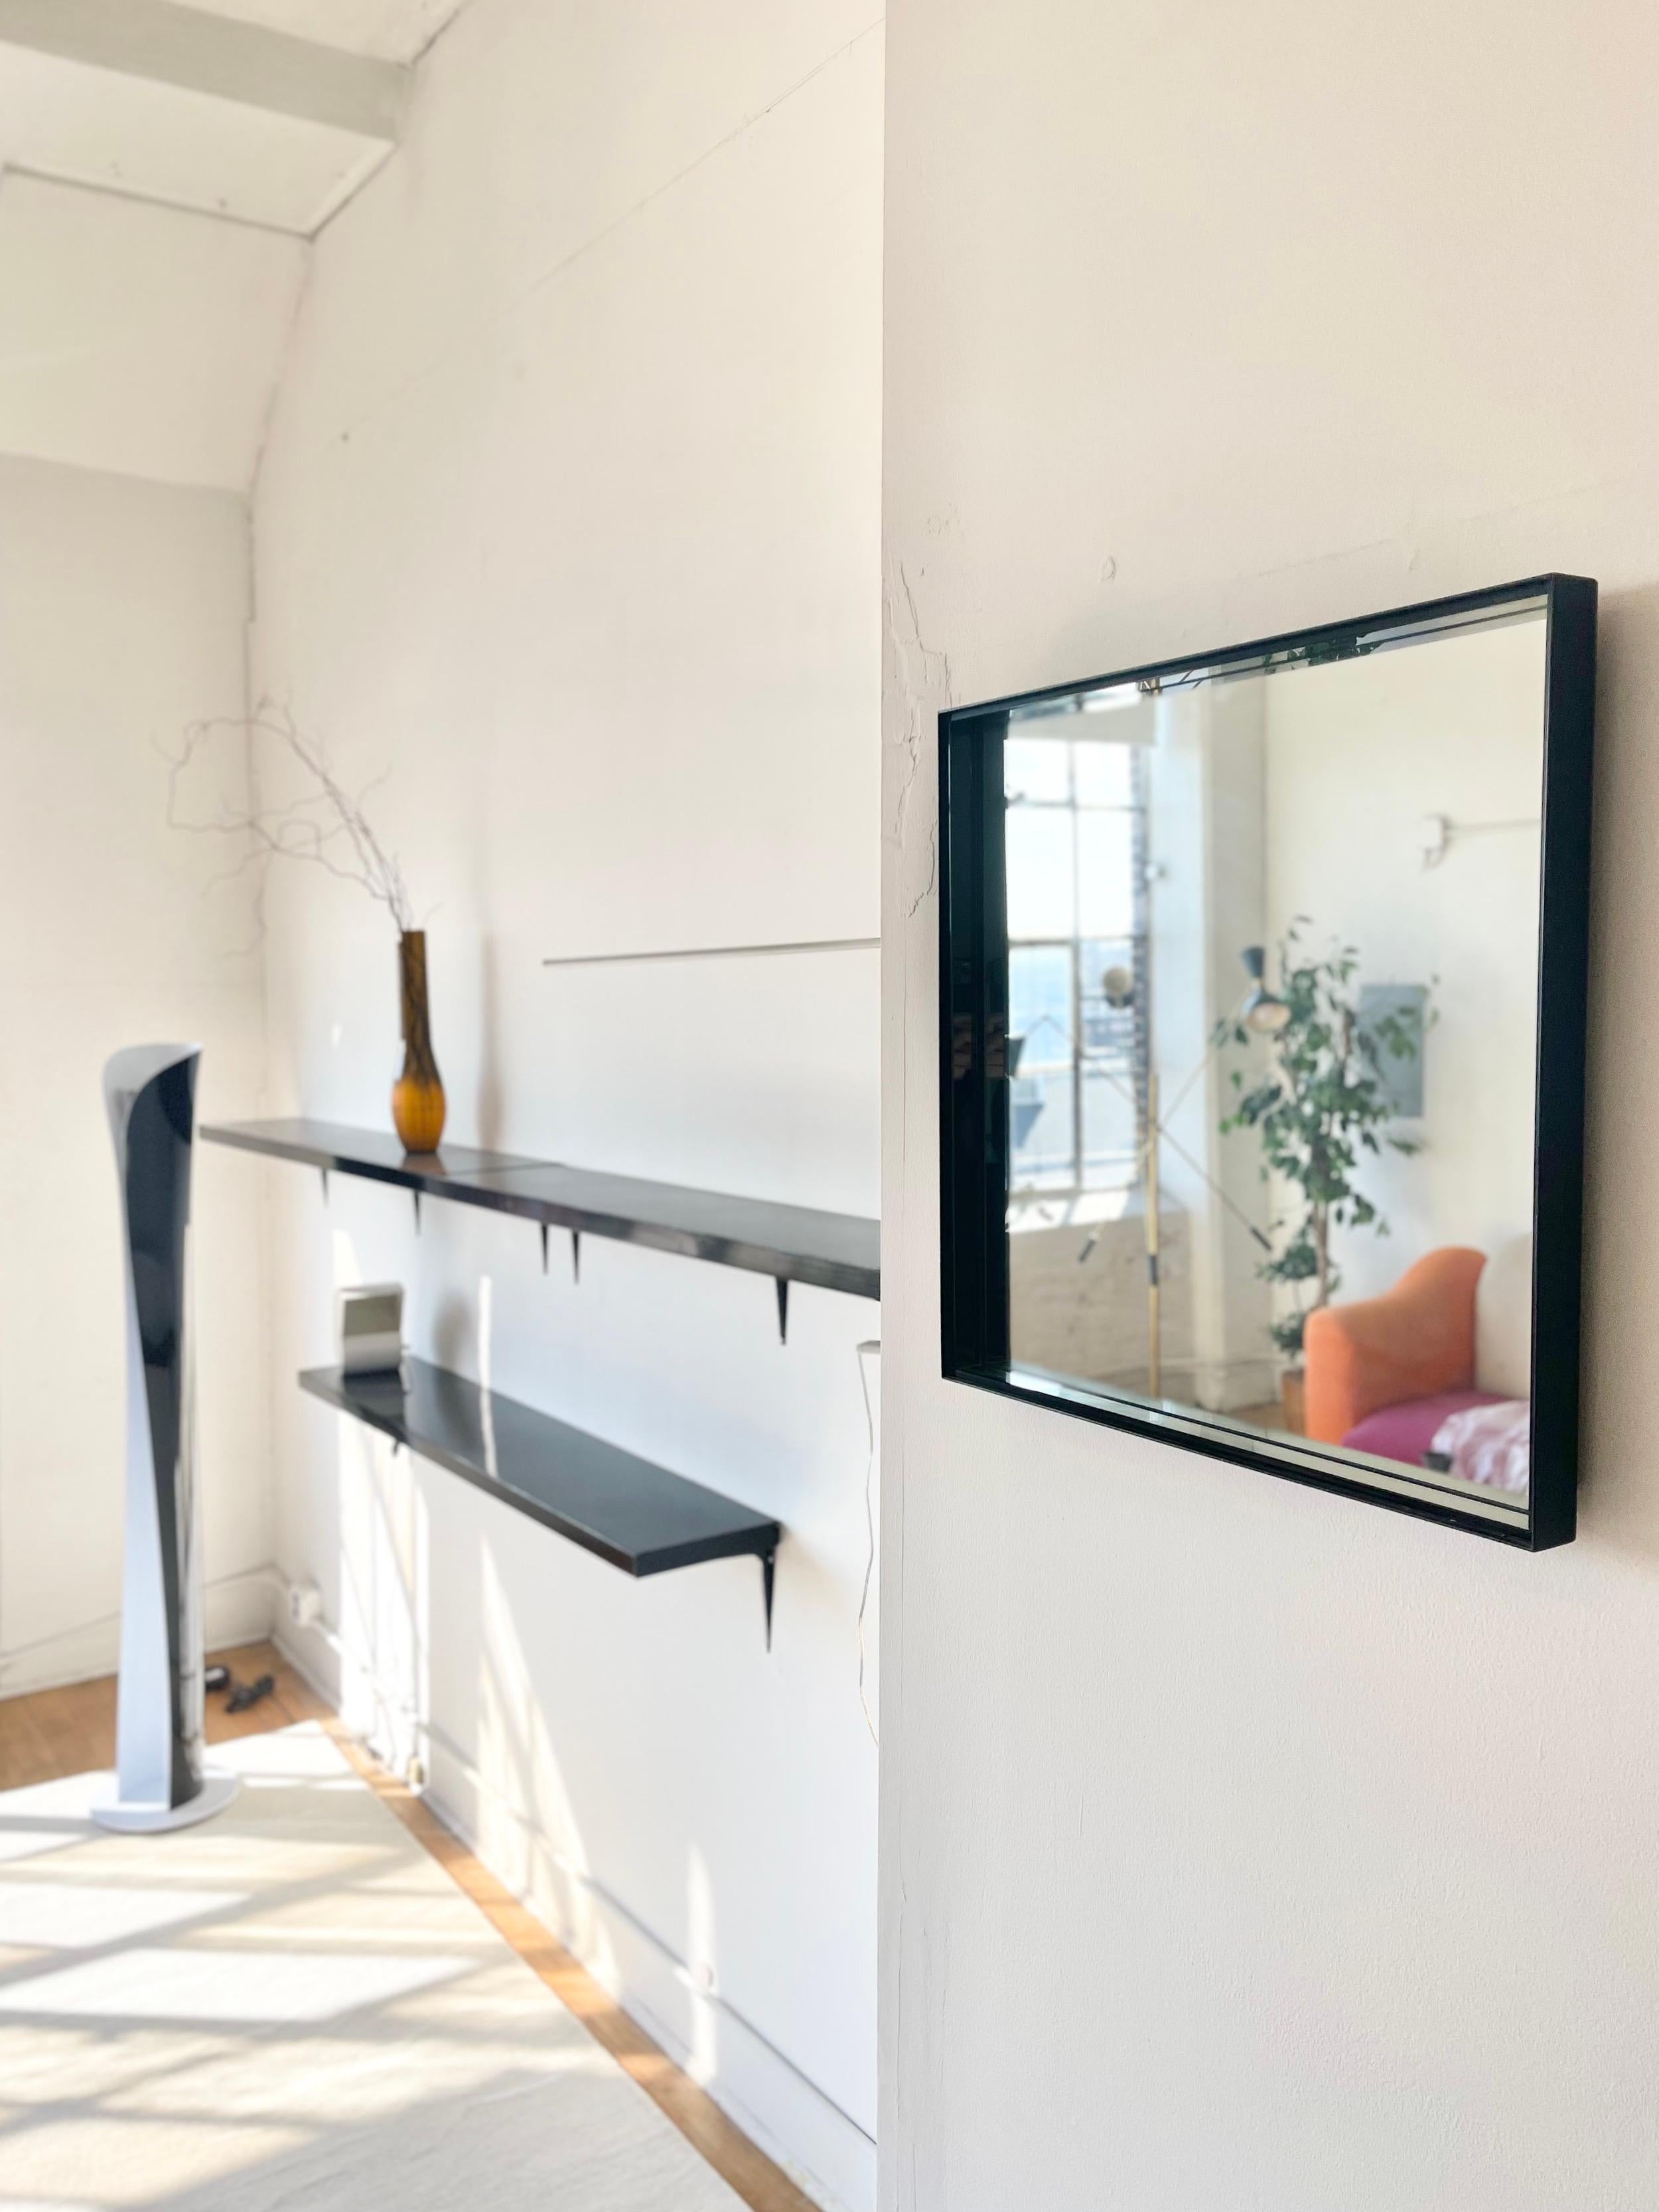 Discover the rare and exquisite Max Ingrand Mirror by Fontana Arte, a remarkable vintage piece designed by the renowned Max Ingrand in the 1960s. This particular model, known as 